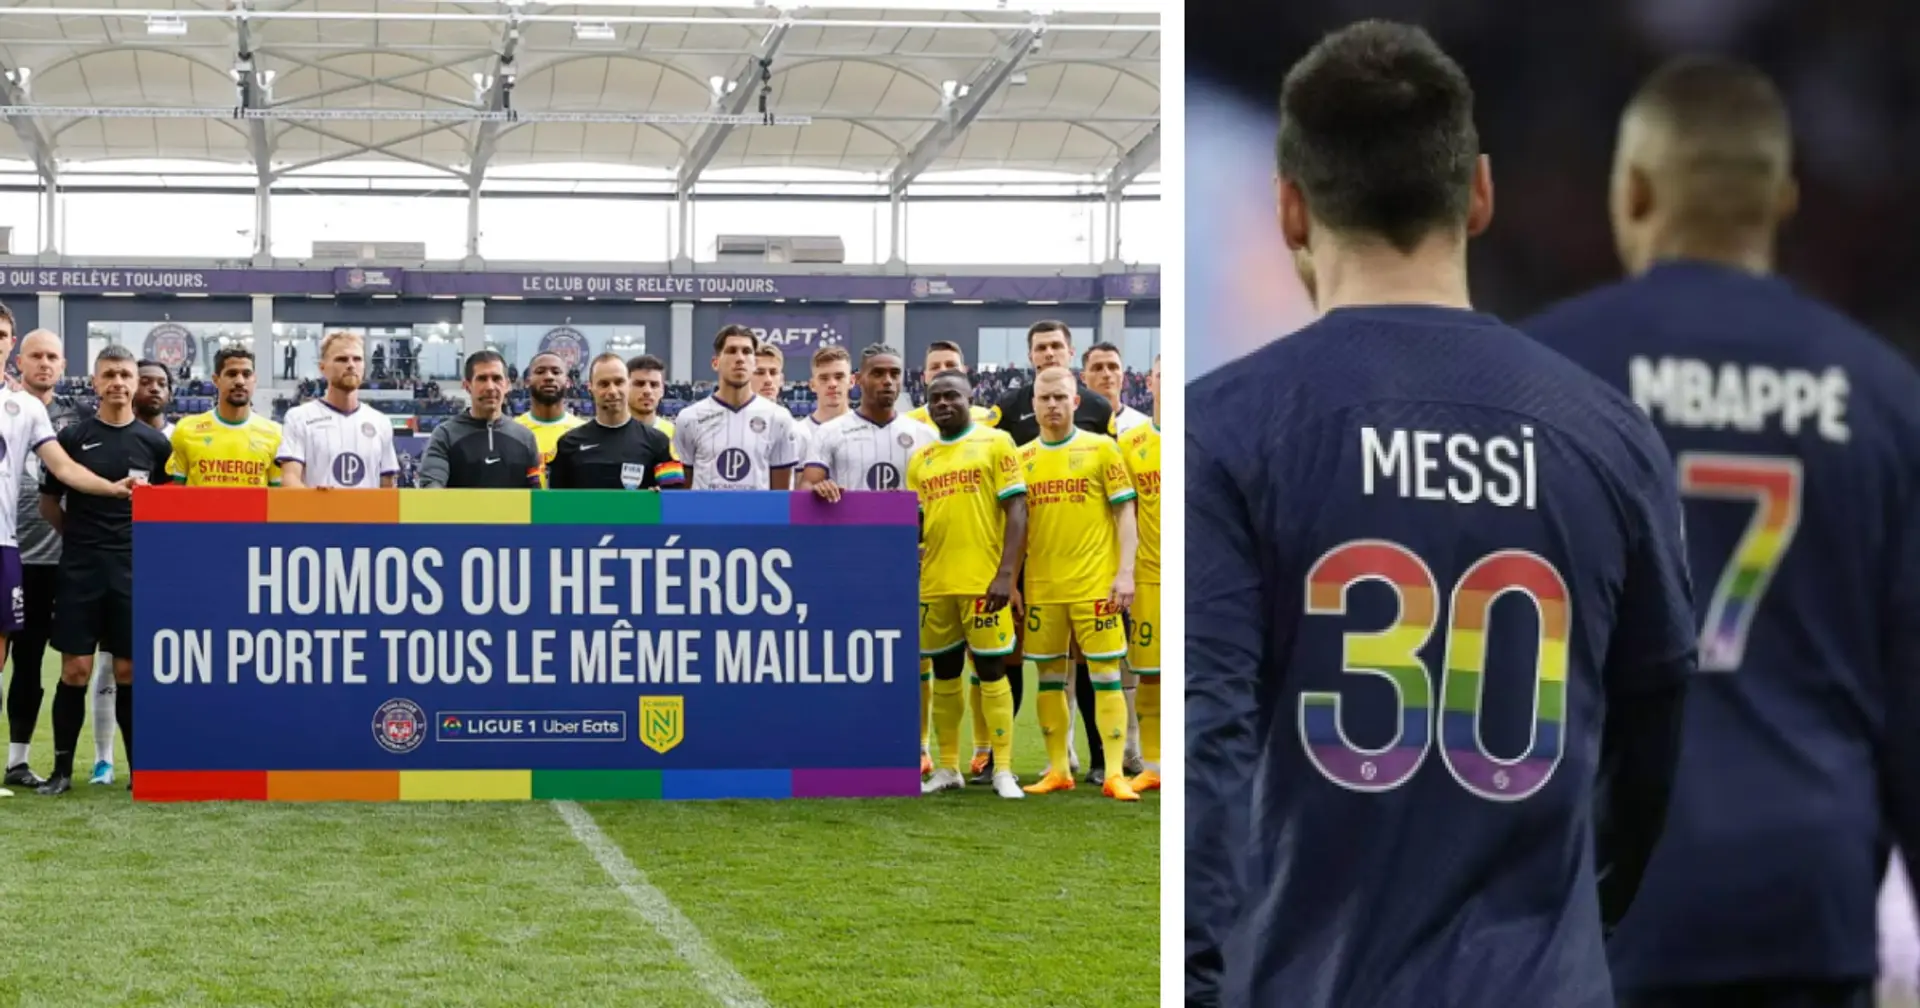 Toulouse players left out of squad after refusal to join anti-homophobia gesture